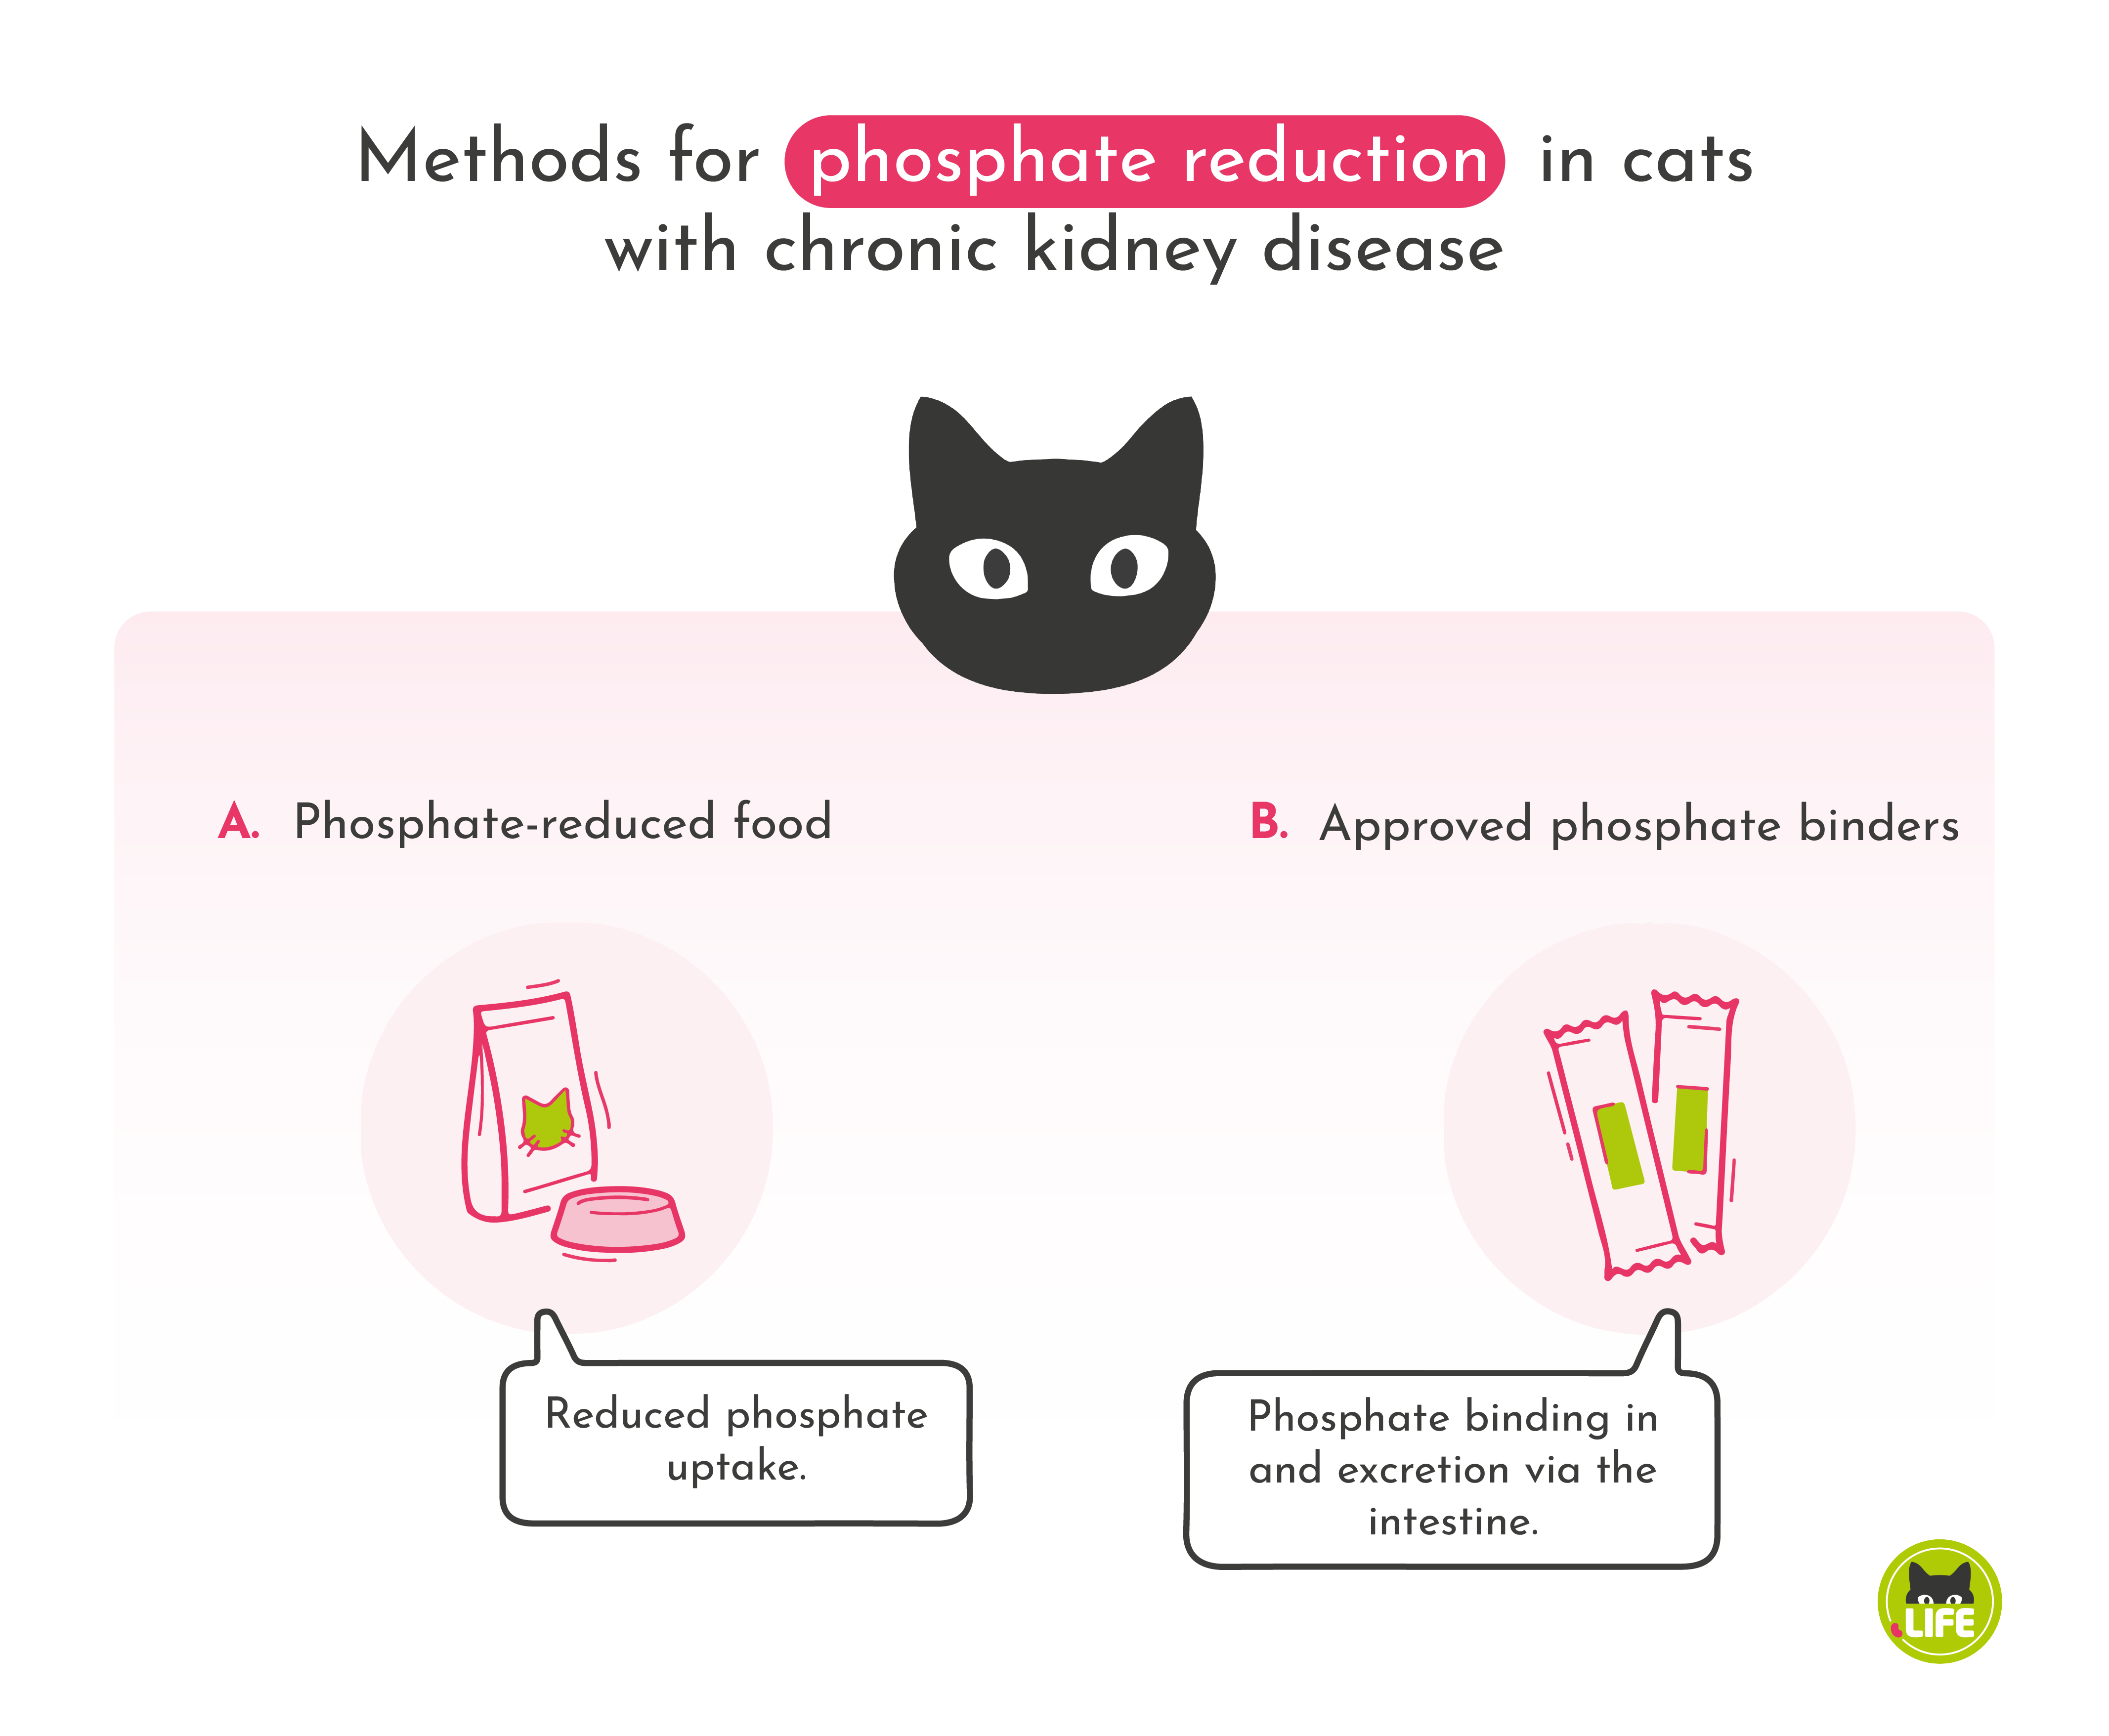 Methods for phosphate reduction in cats with chronic kidney disease.